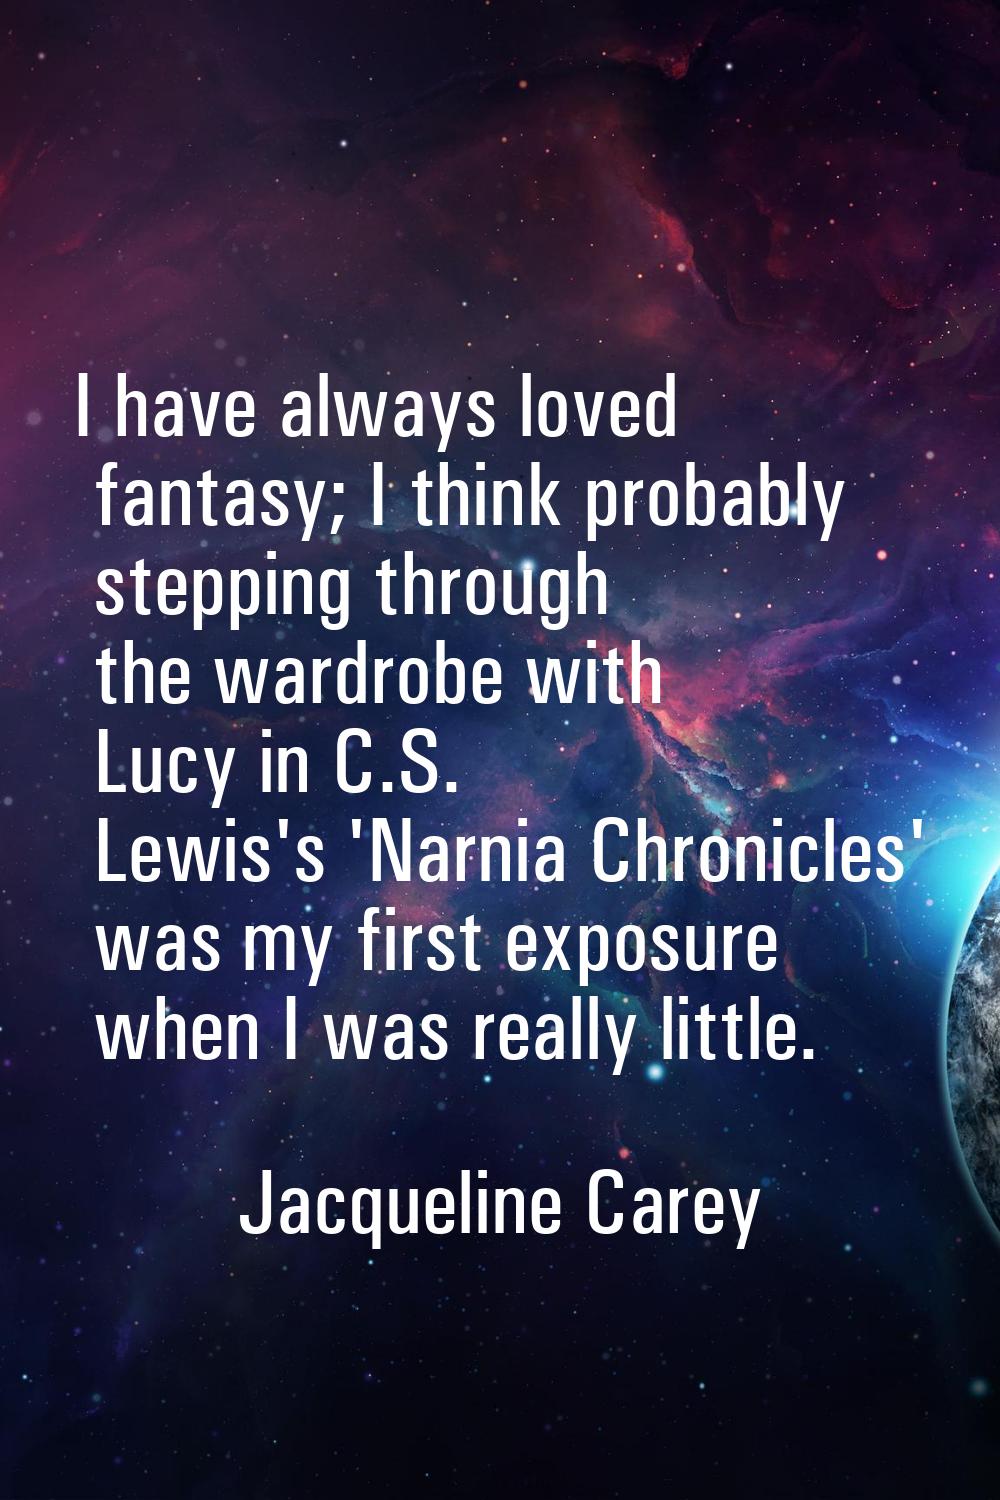 I have always loved fantasy; I think probably stepping through the wardrobe with Lucy in C.S. Lewis